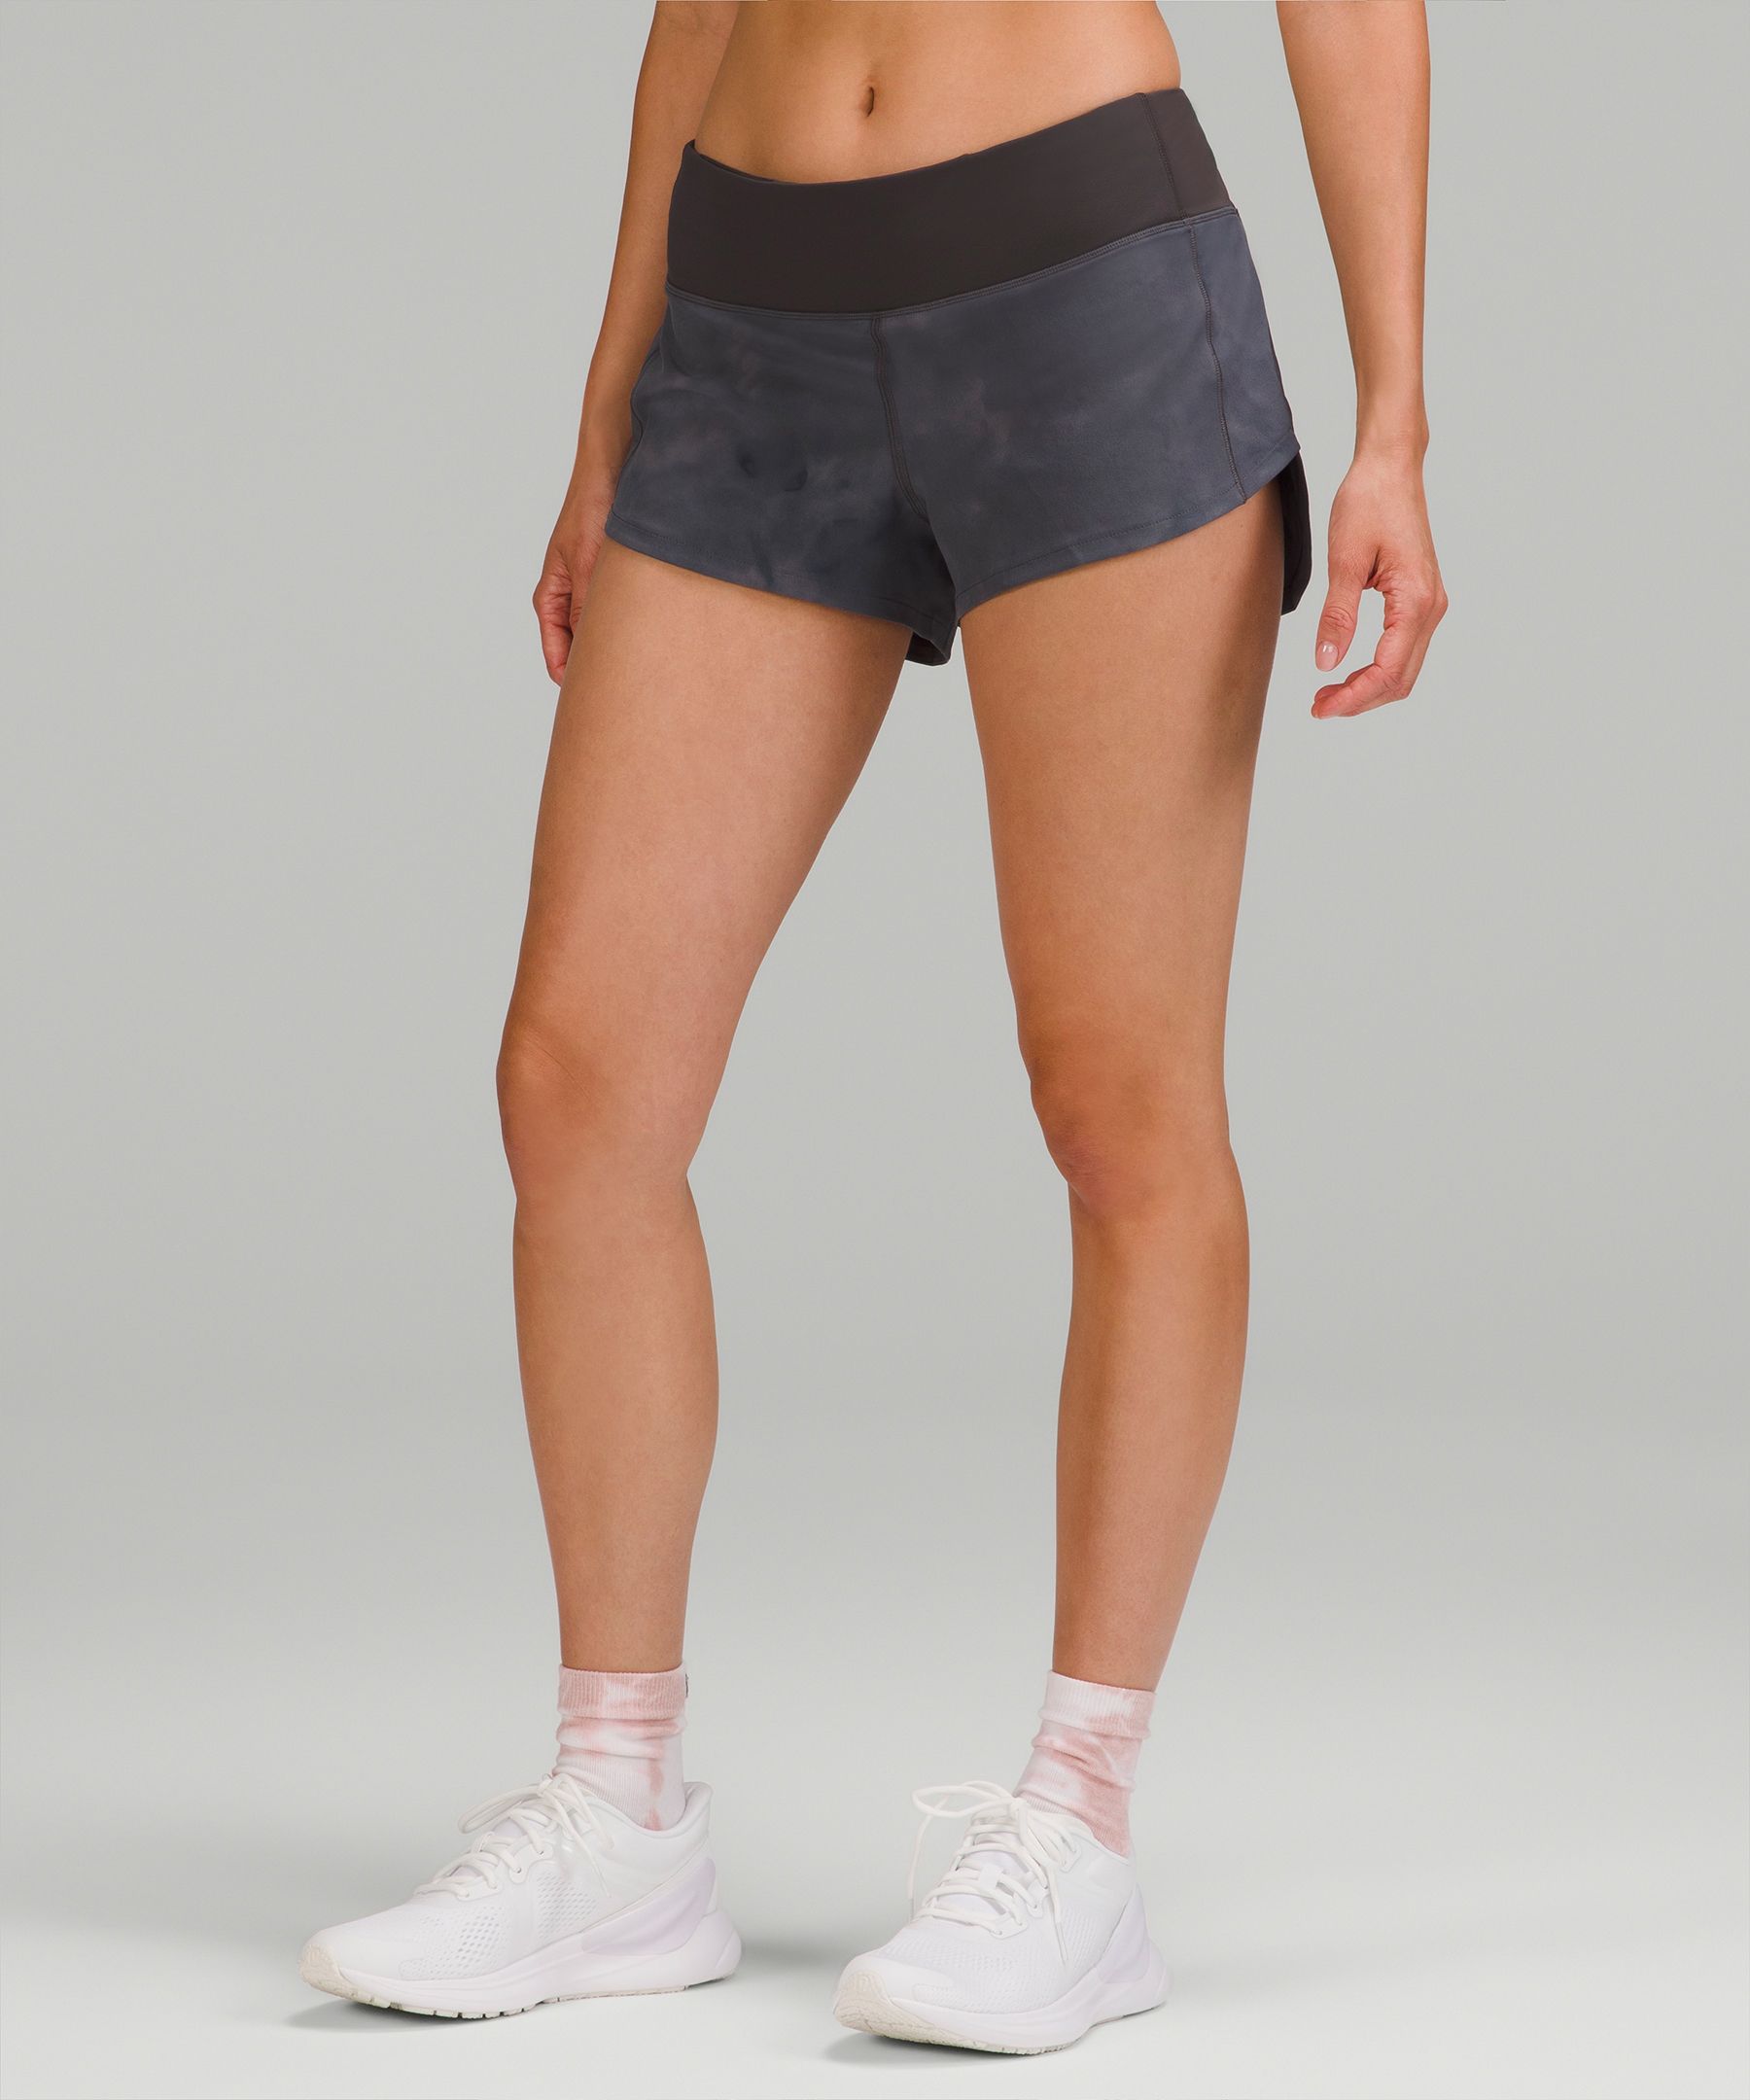 Speed Up Low-Rise Lined Short 2.5, Women's Shorts